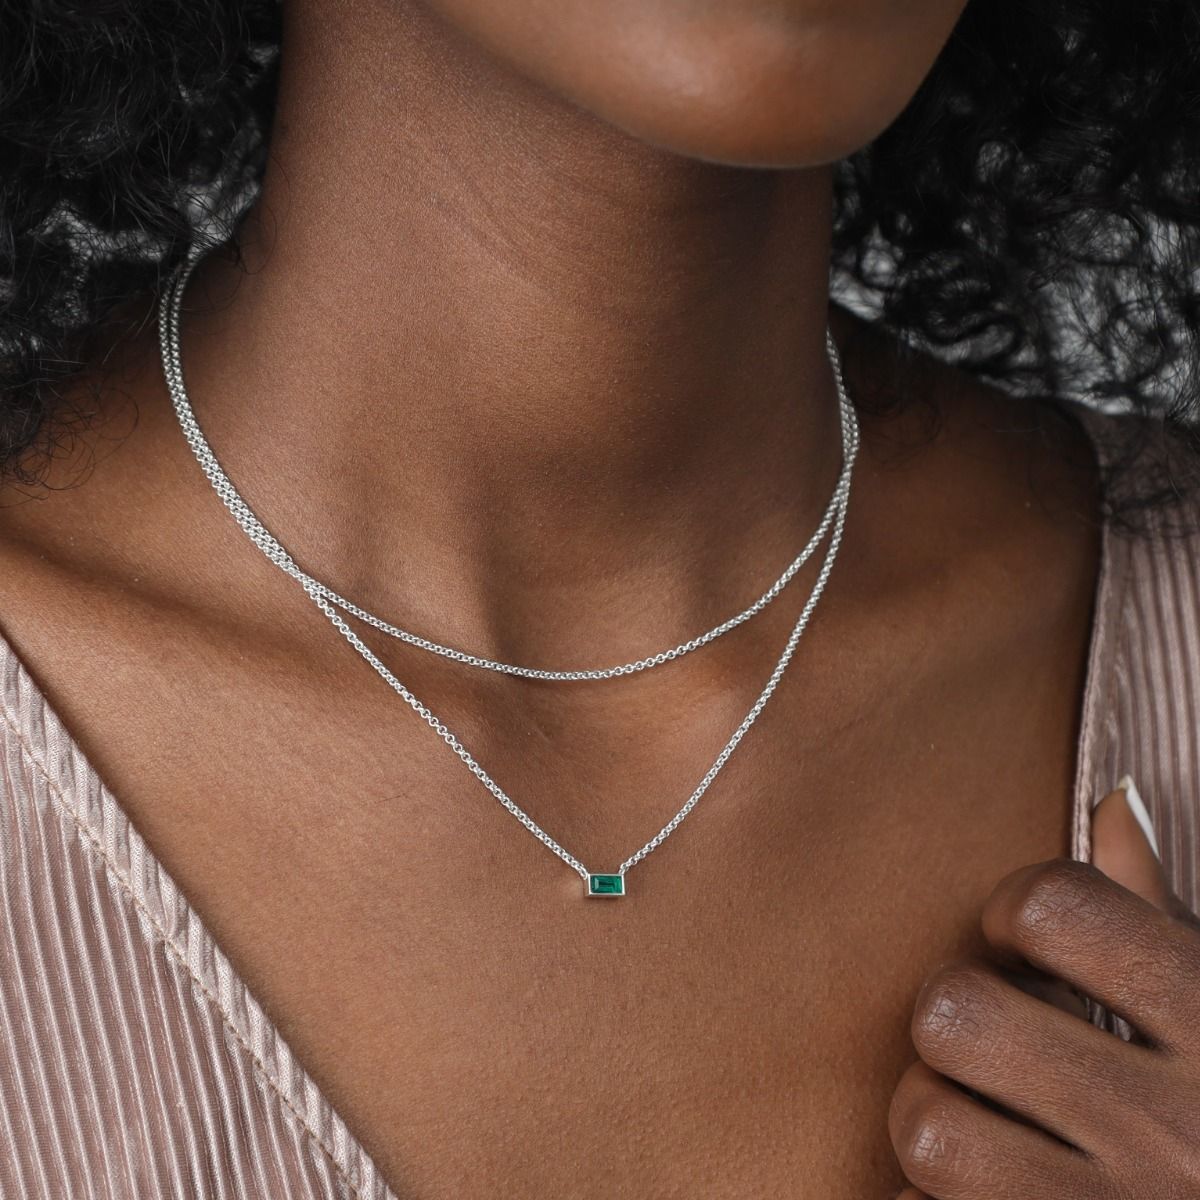 https://assets.talisa.com/media/catalog/product/cache/9d9cfe61409a16ca1d976d88c434262d/g/e/genuine_emerald_necklace_in_sterling_silver_3_.jpg